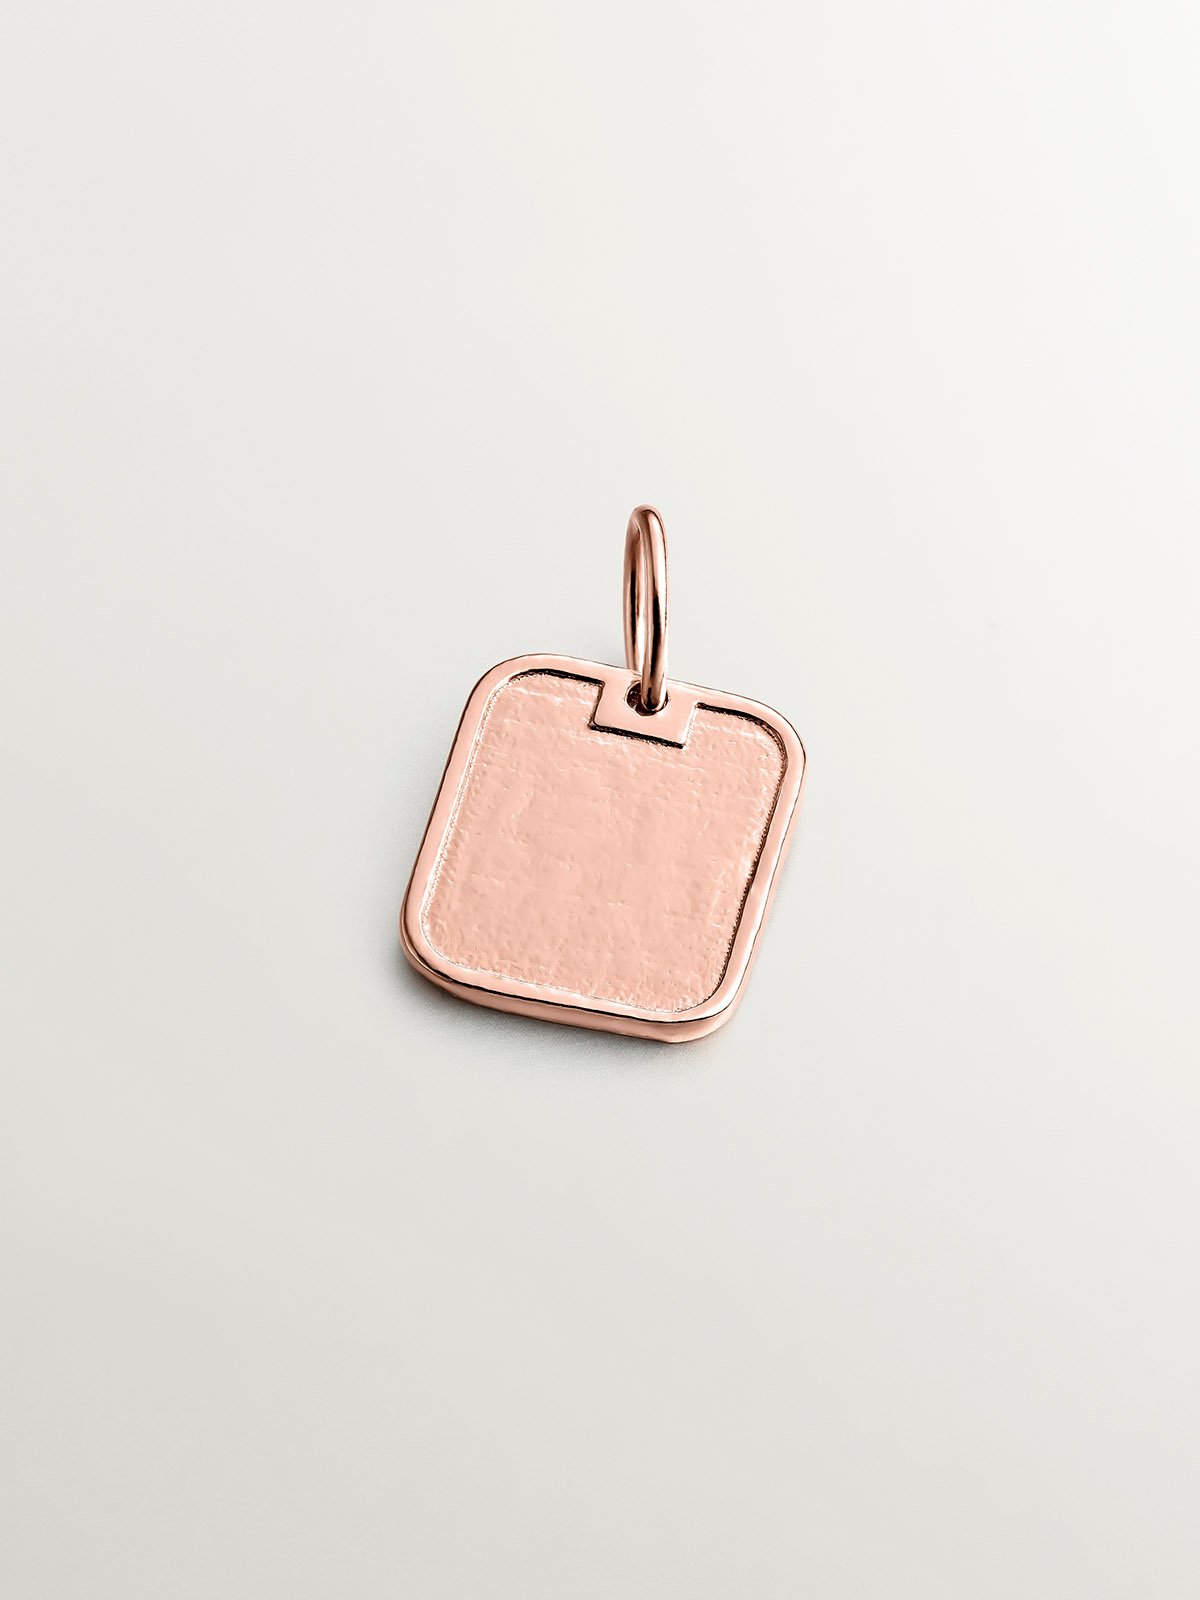 925 silver charm bathed in 18k rose gold with number 6